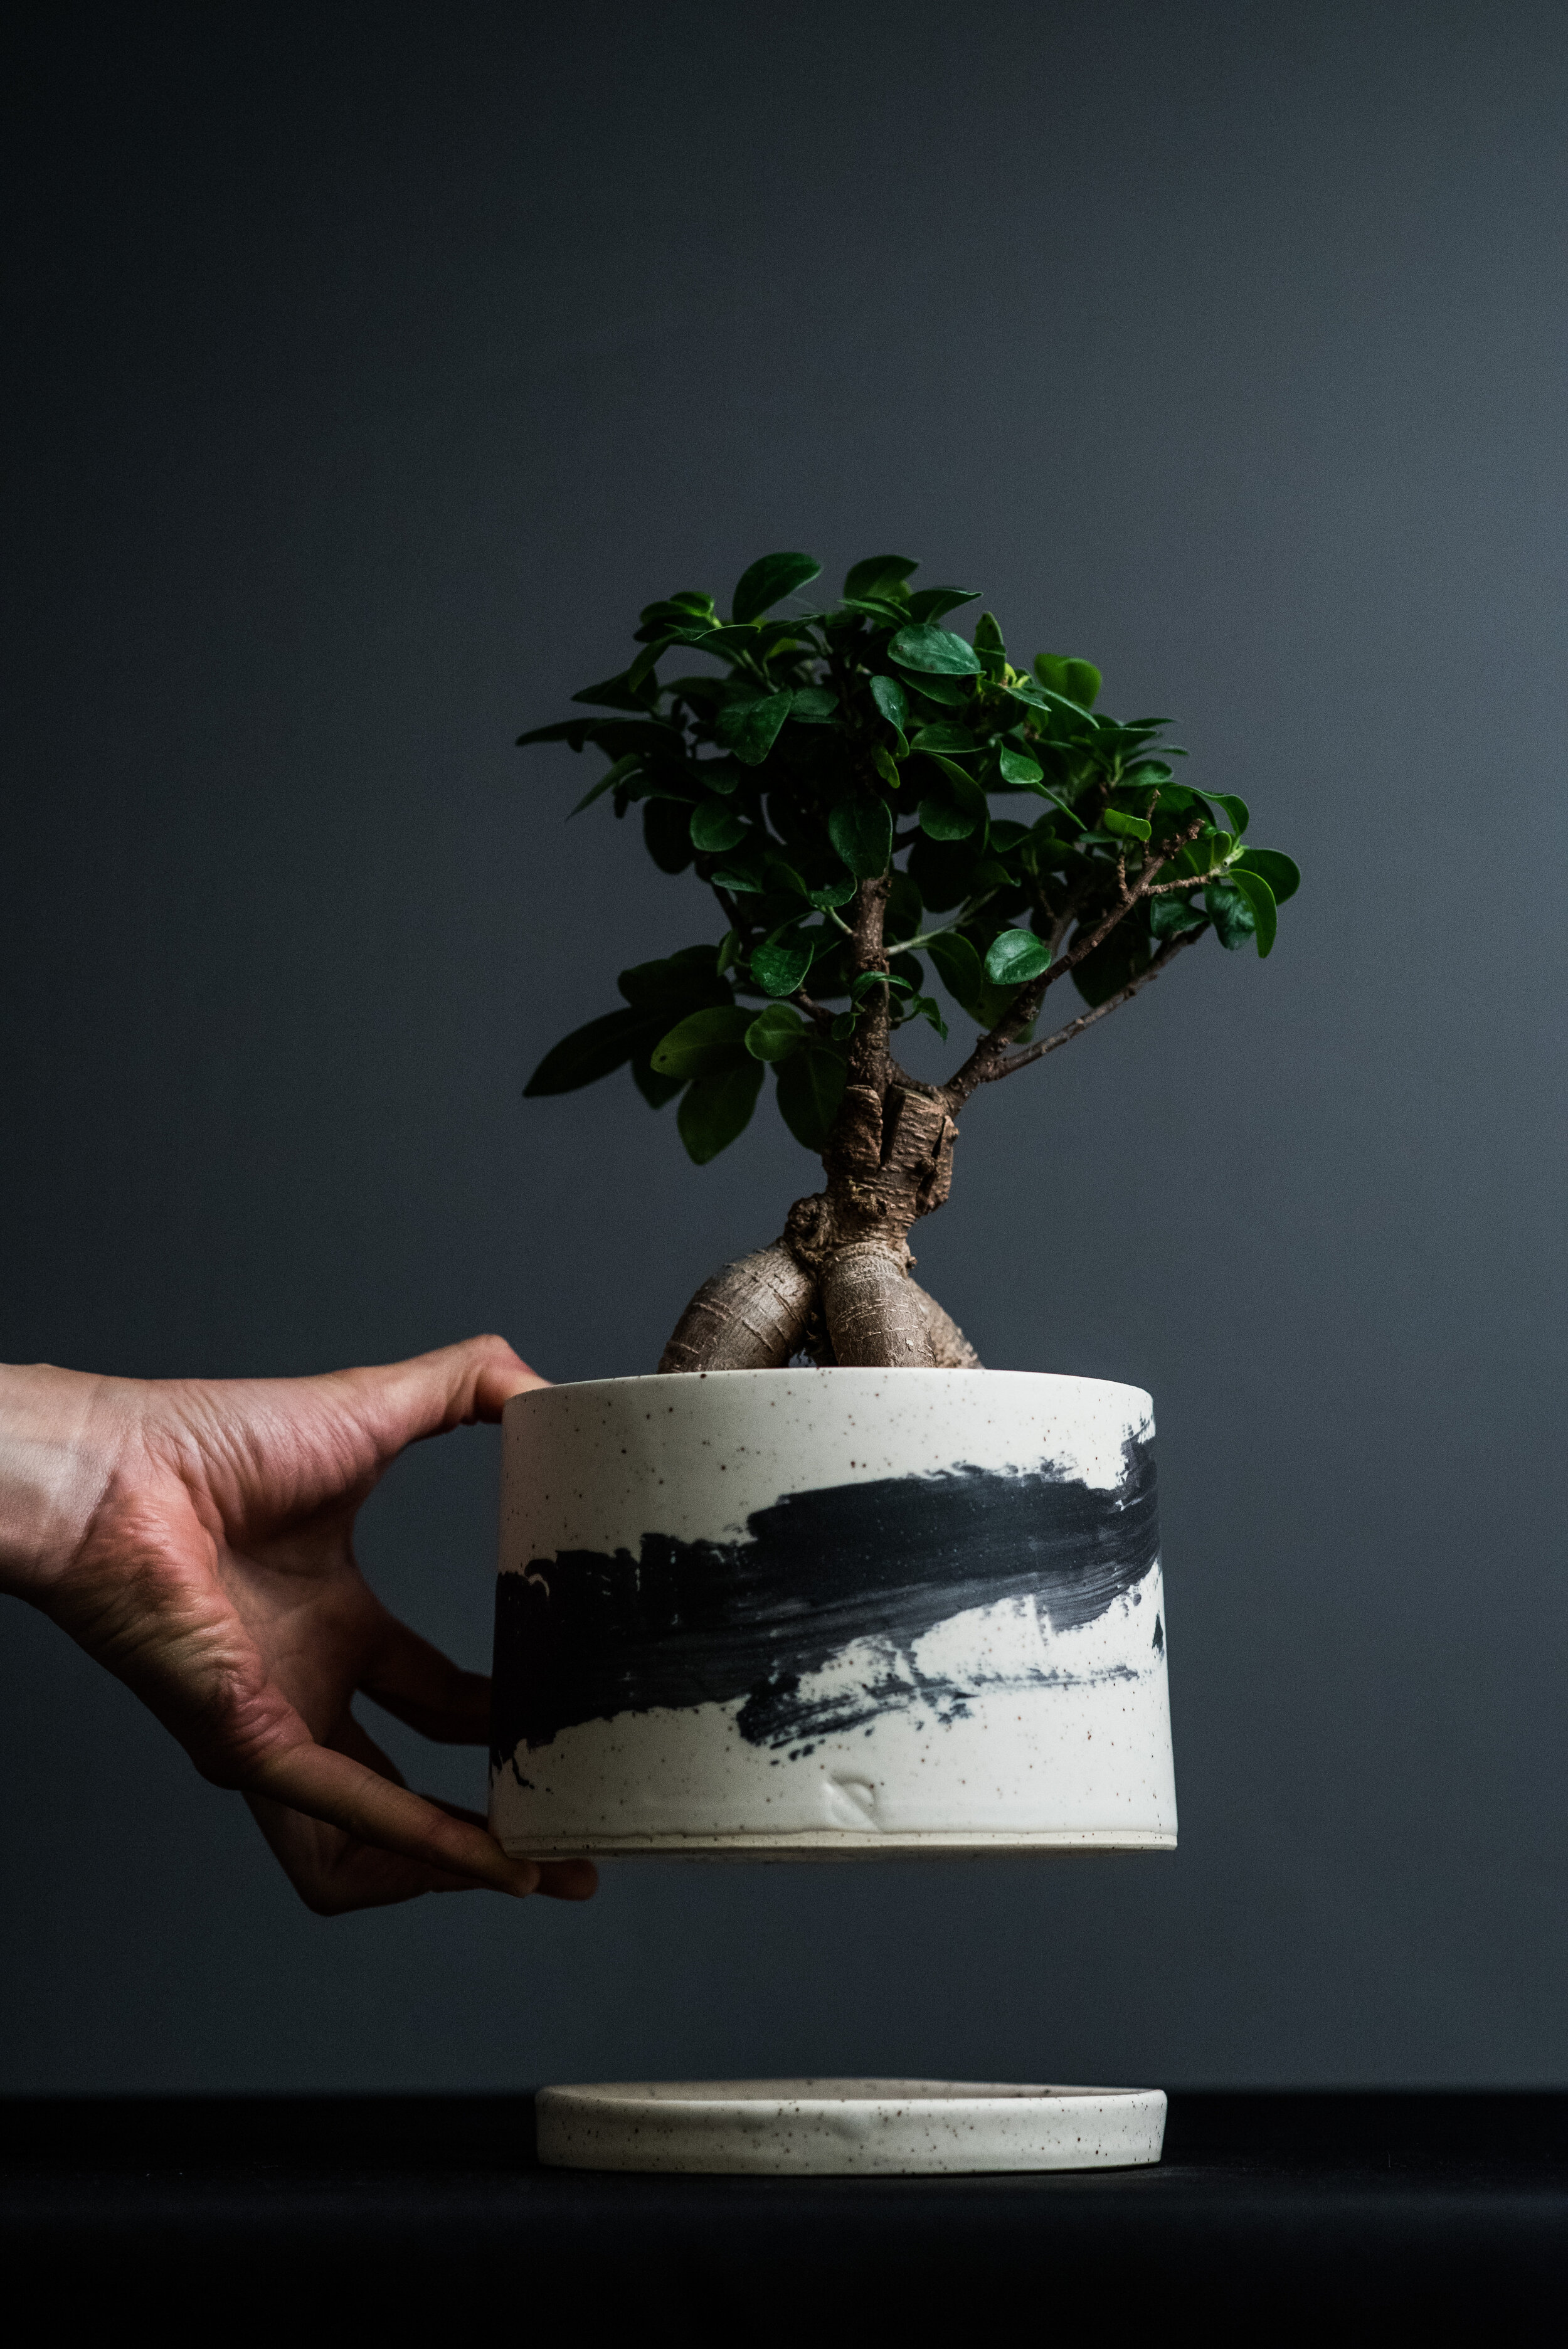   Quin Cheung  , Planter , 2019.  White speckled clay, 15 x 12 x 12 cm. COURTESY OF DQ STUDIOS 